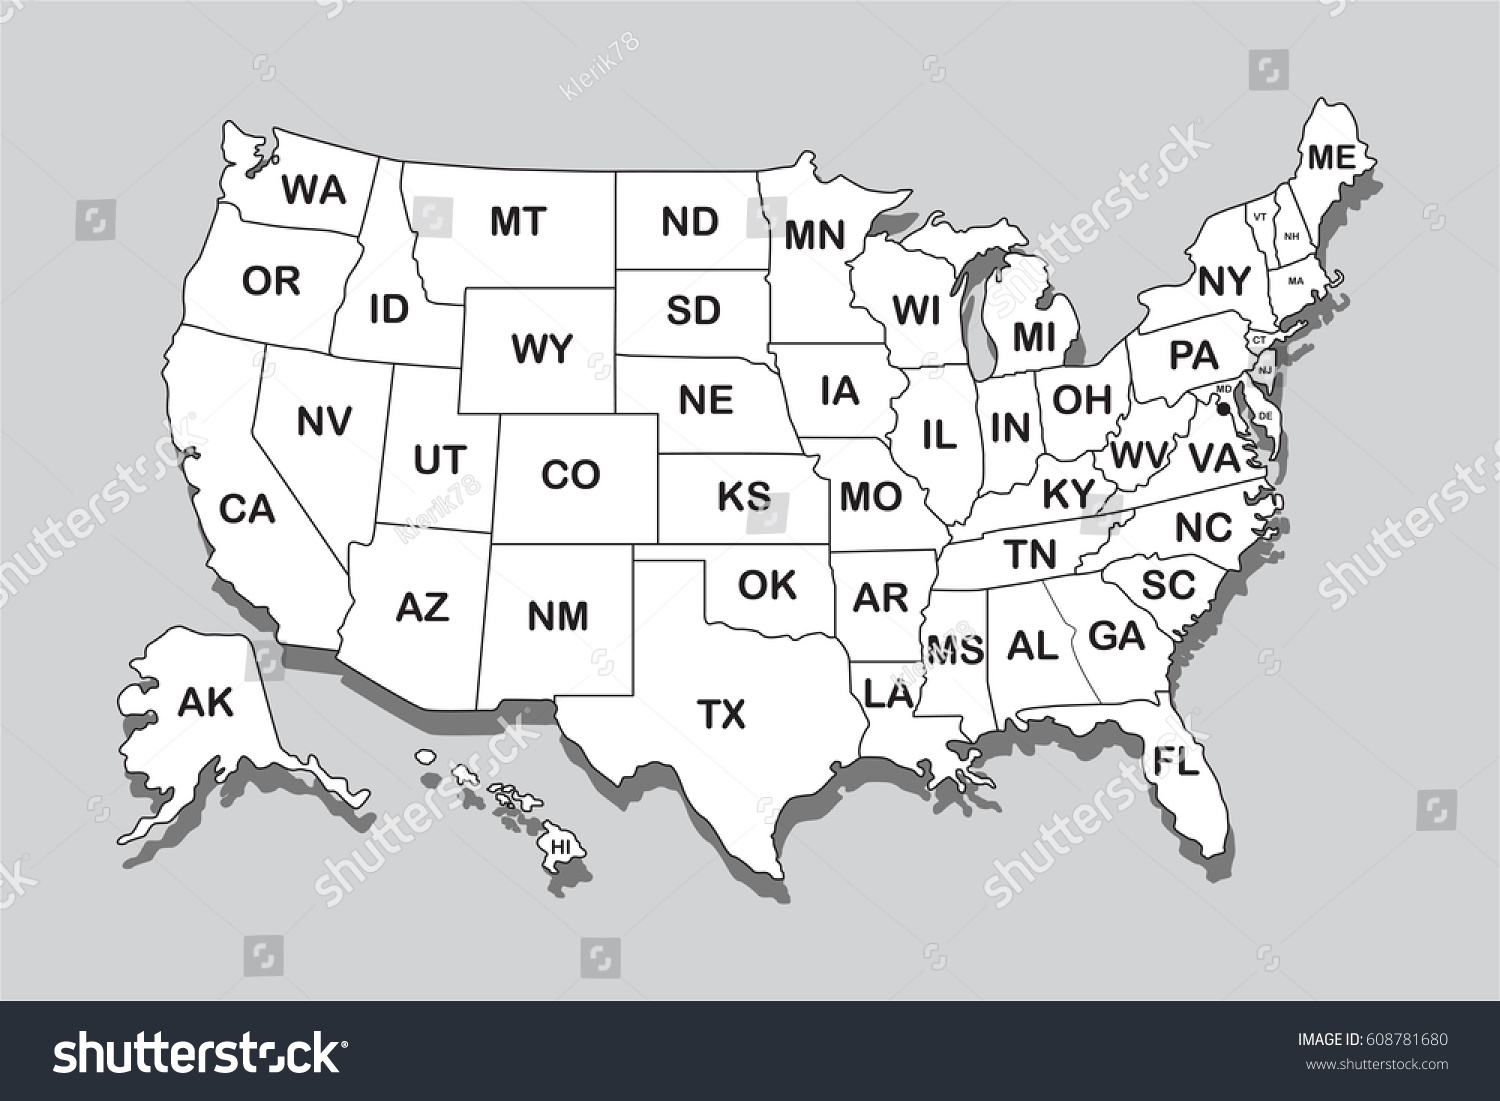 Poster Map United States America State Stock Vector 608781680 Shutterstock 